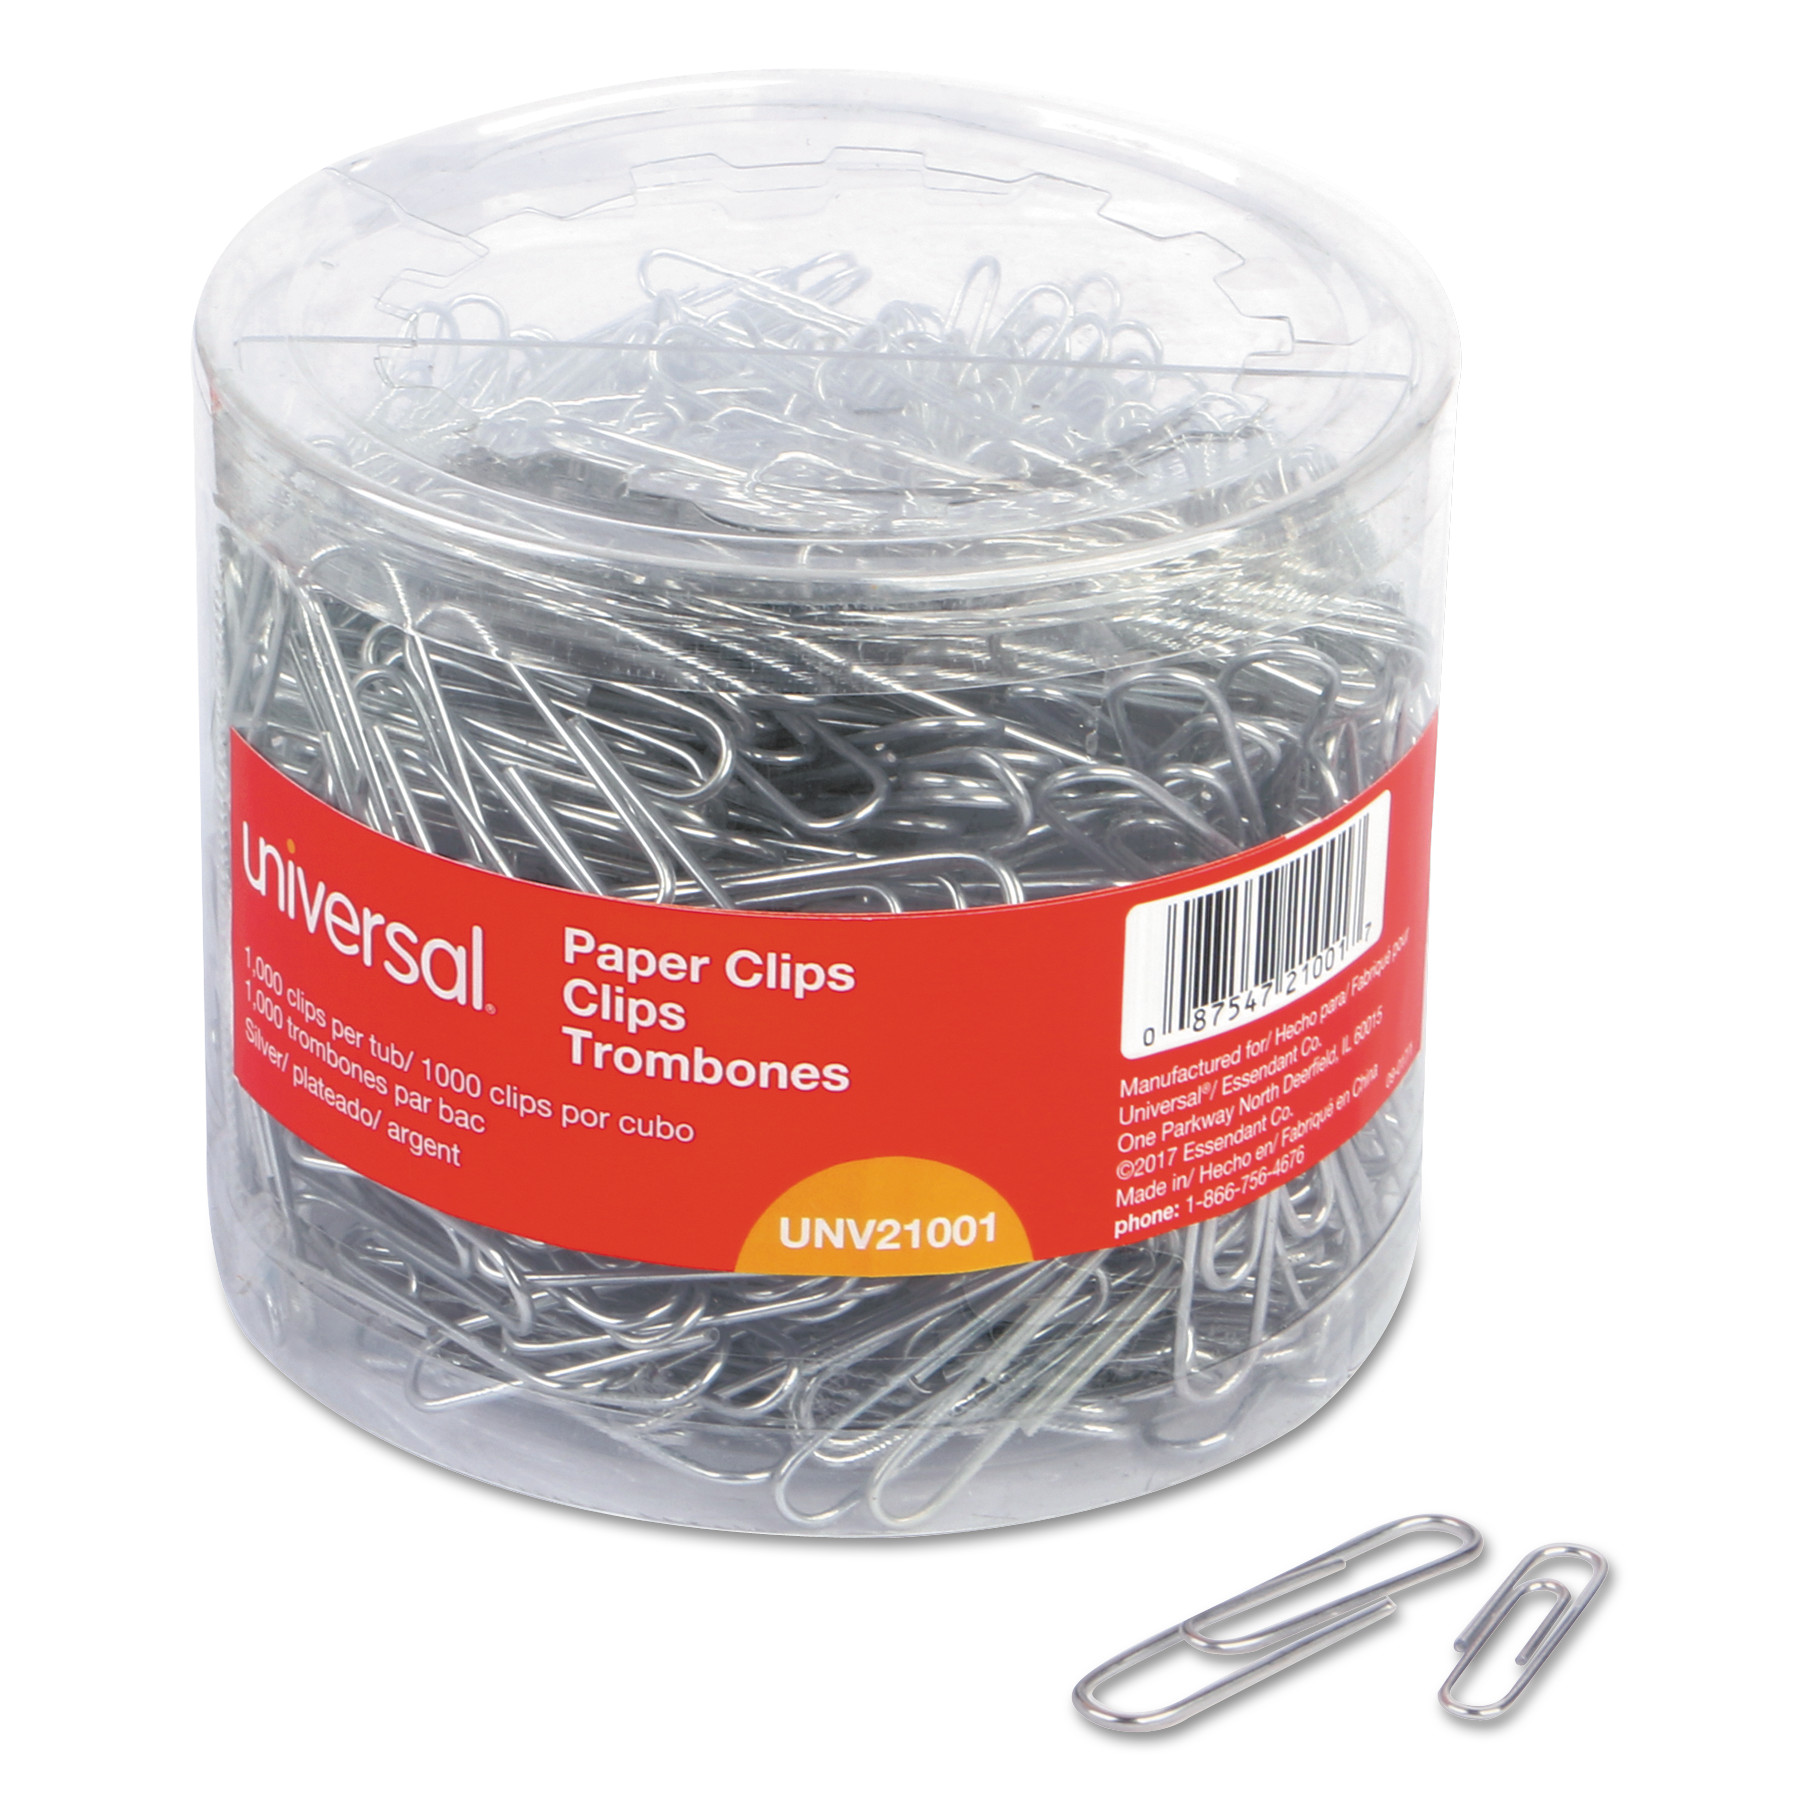  Universal UNV21001 Plastic-Coated Paper Clips, Assorted Sizes, Silver, 1,000/Pack (UNV21001) 